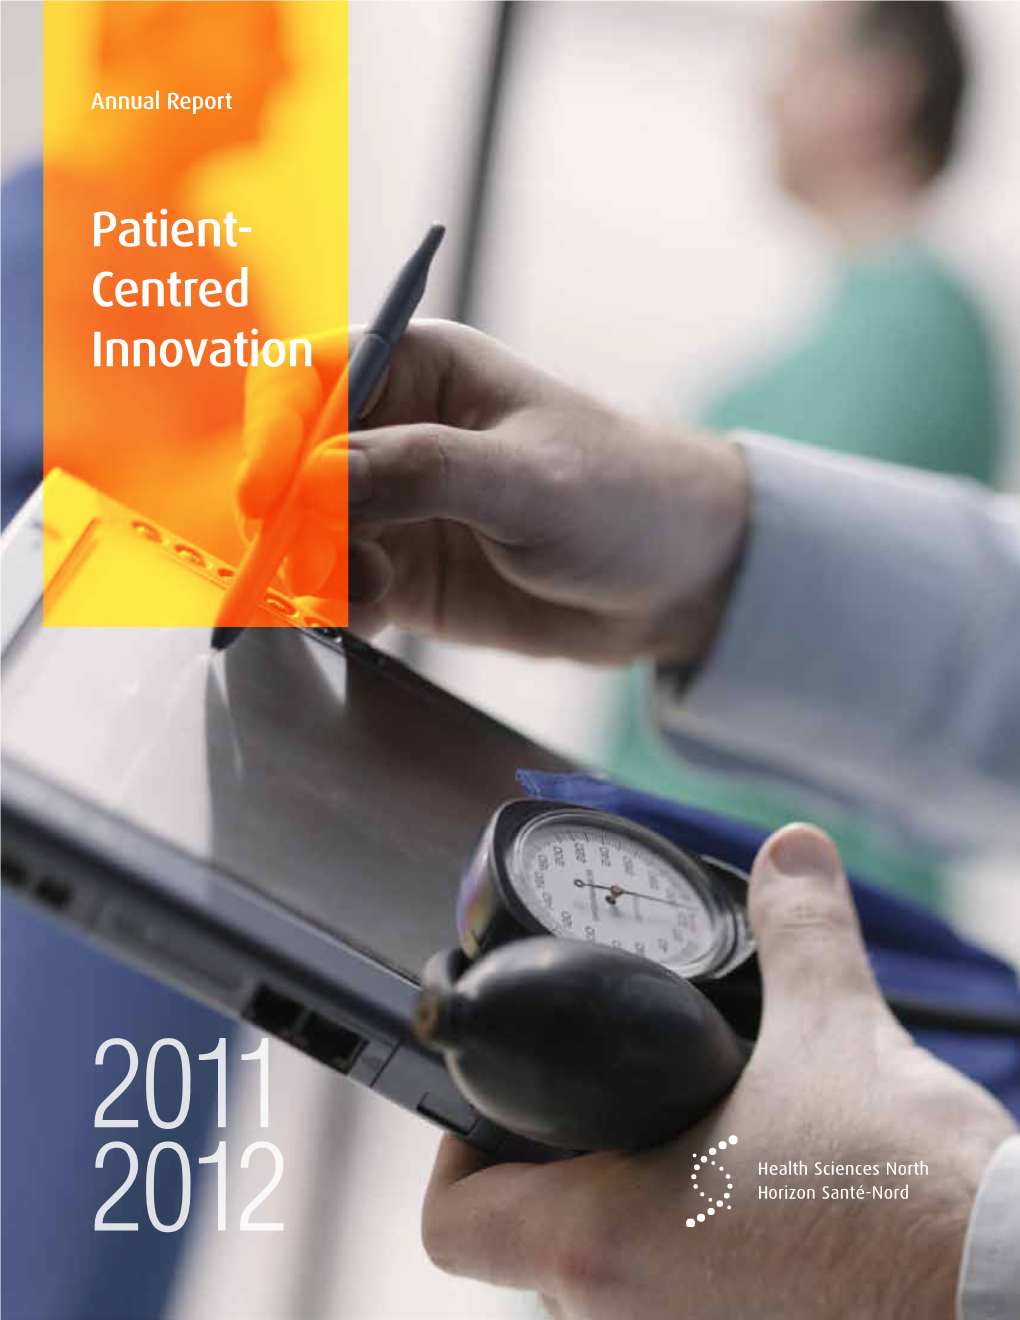 Patient- Centred Innovation